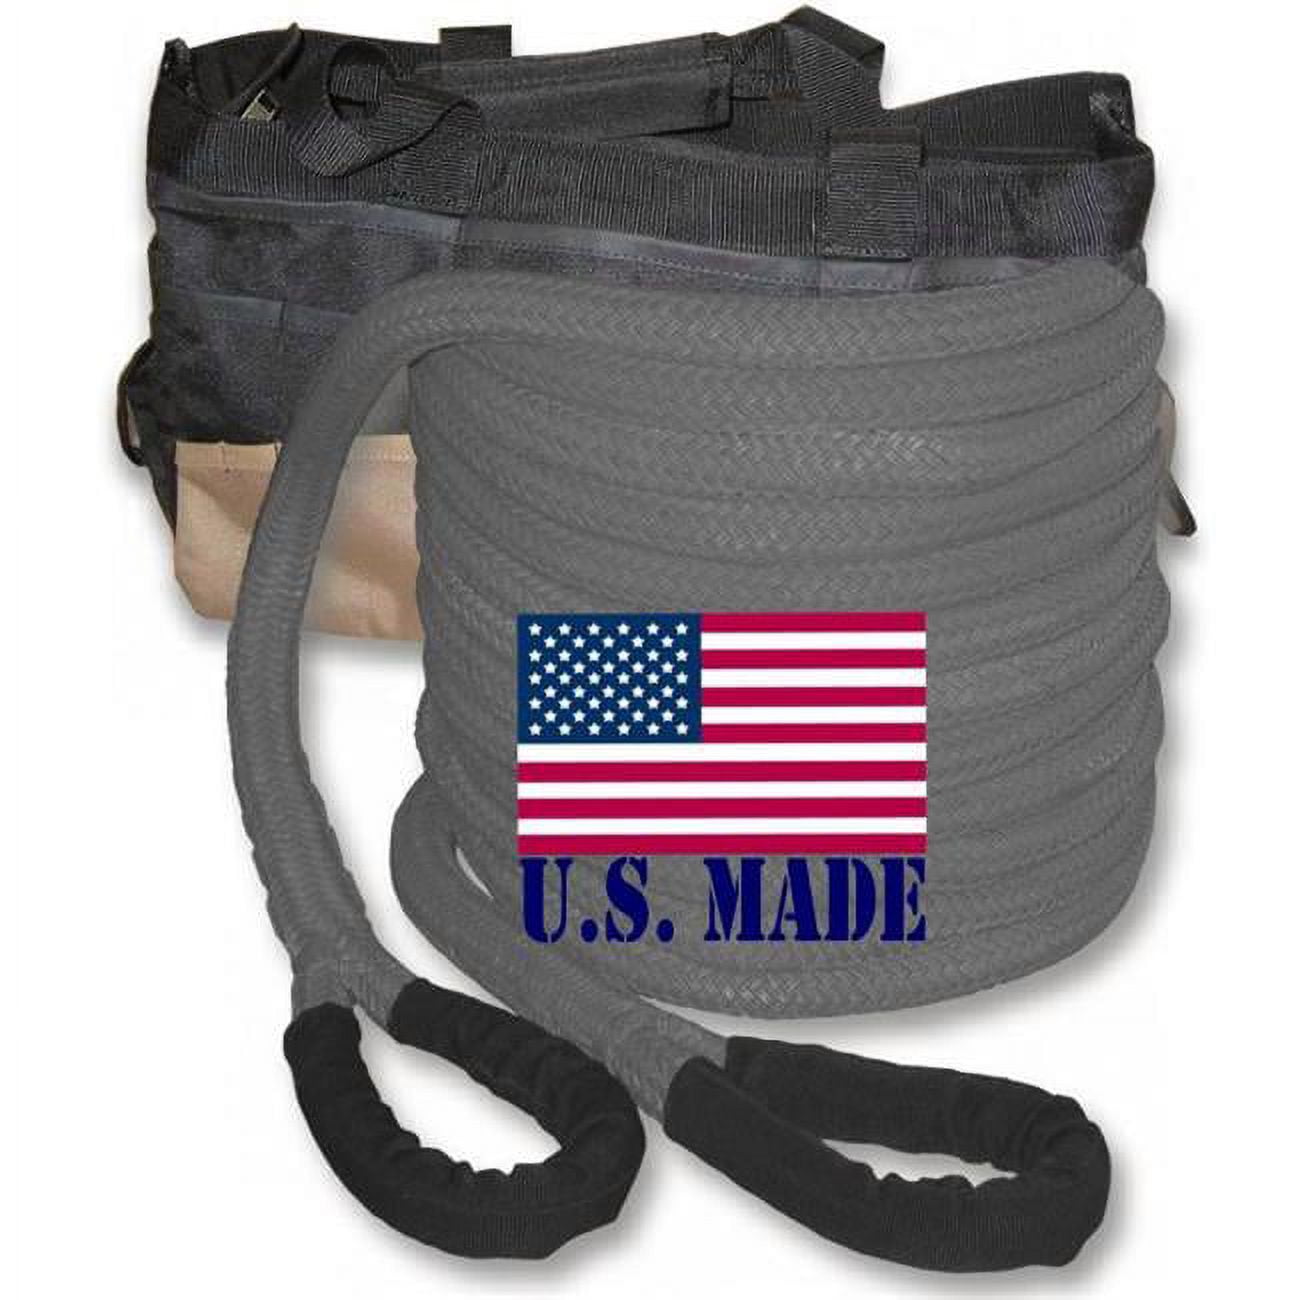 U.s. Made "gunmetal Grey" Safe-t-line® Kinetic Recovery (snatch) Rope - 1 Inch X 30 Ft With Heavy-duty Carry Bag (4x4 Vehicle Recovery)